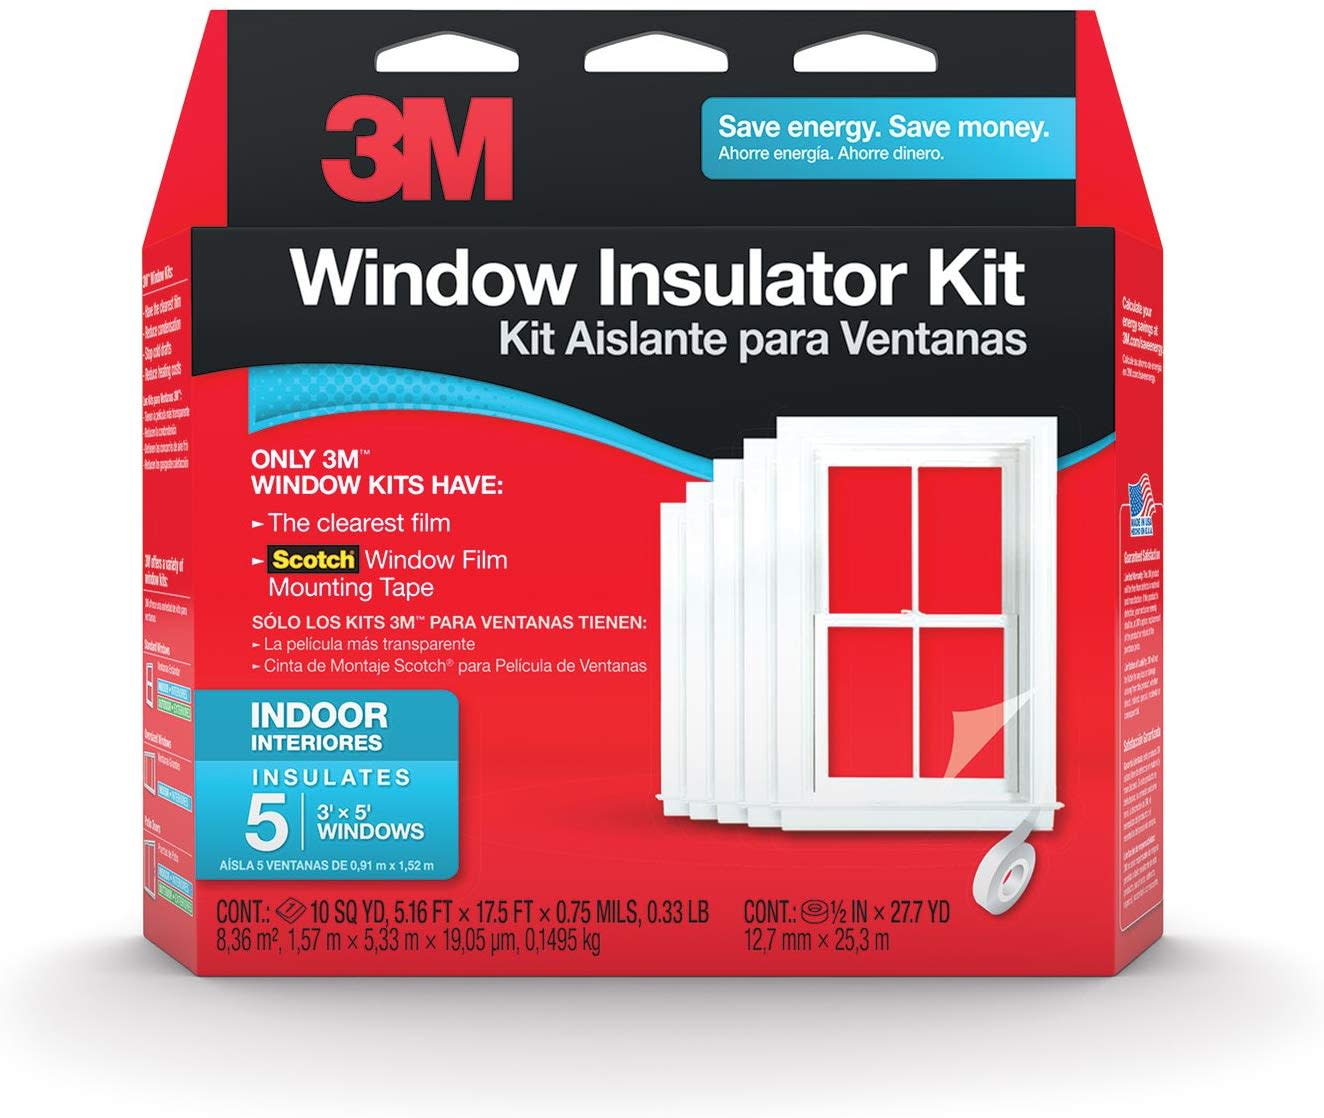 Warm your house without raising your thermostat with a window insulation kit